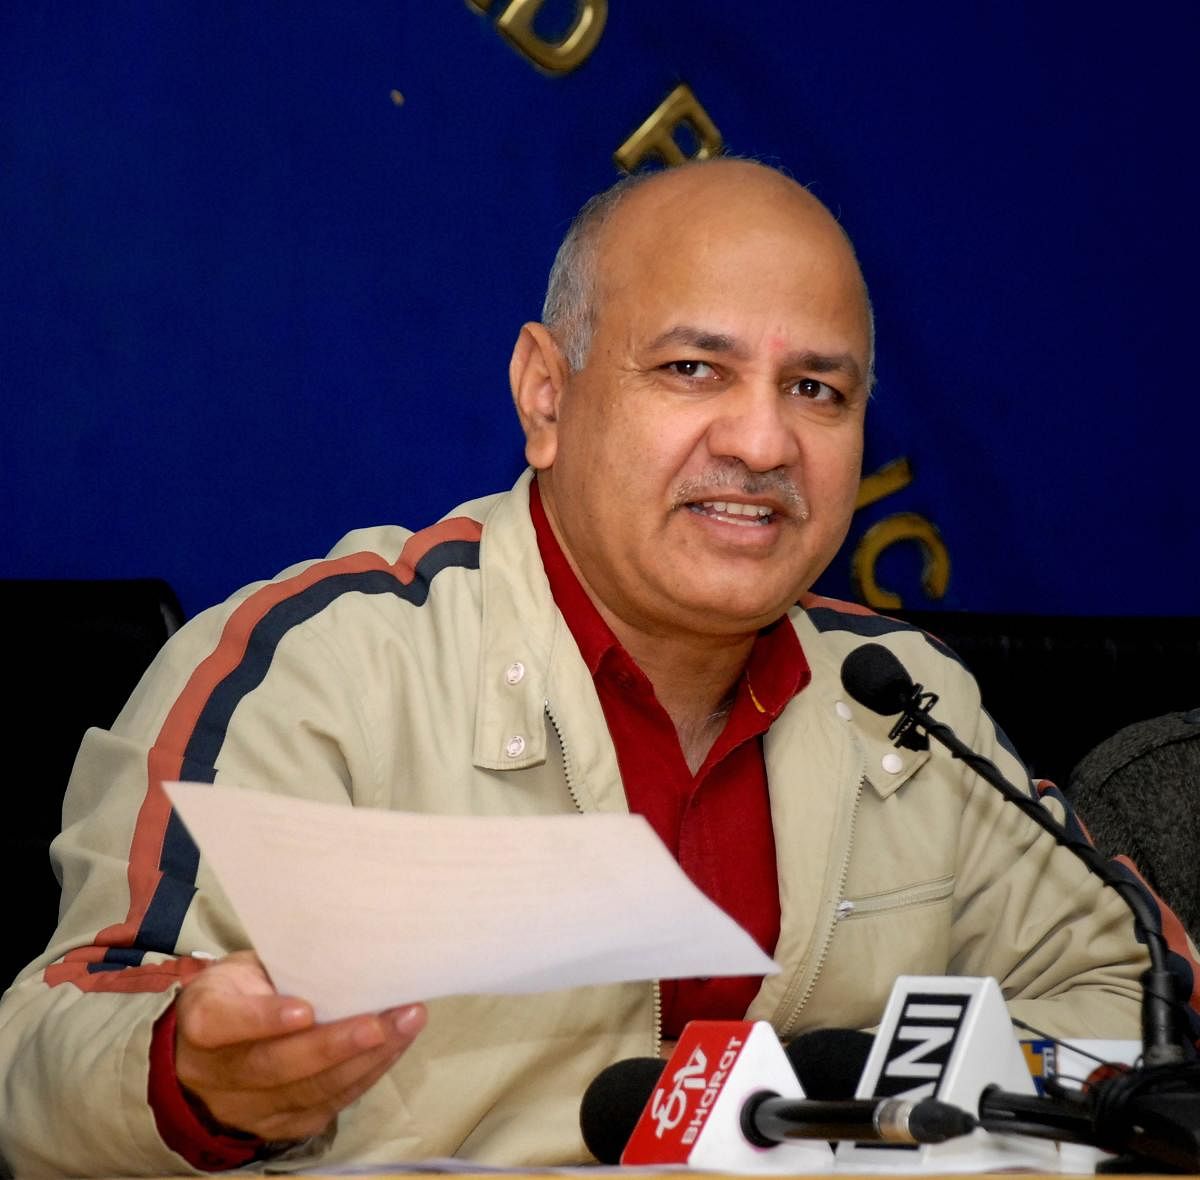 All the policies of the BJP were against "good and cheap" education, he alleged and sought an explanation from the party over hike in CBSE examination fees that "burdened six lakh families" in Delhi. PTI file photo